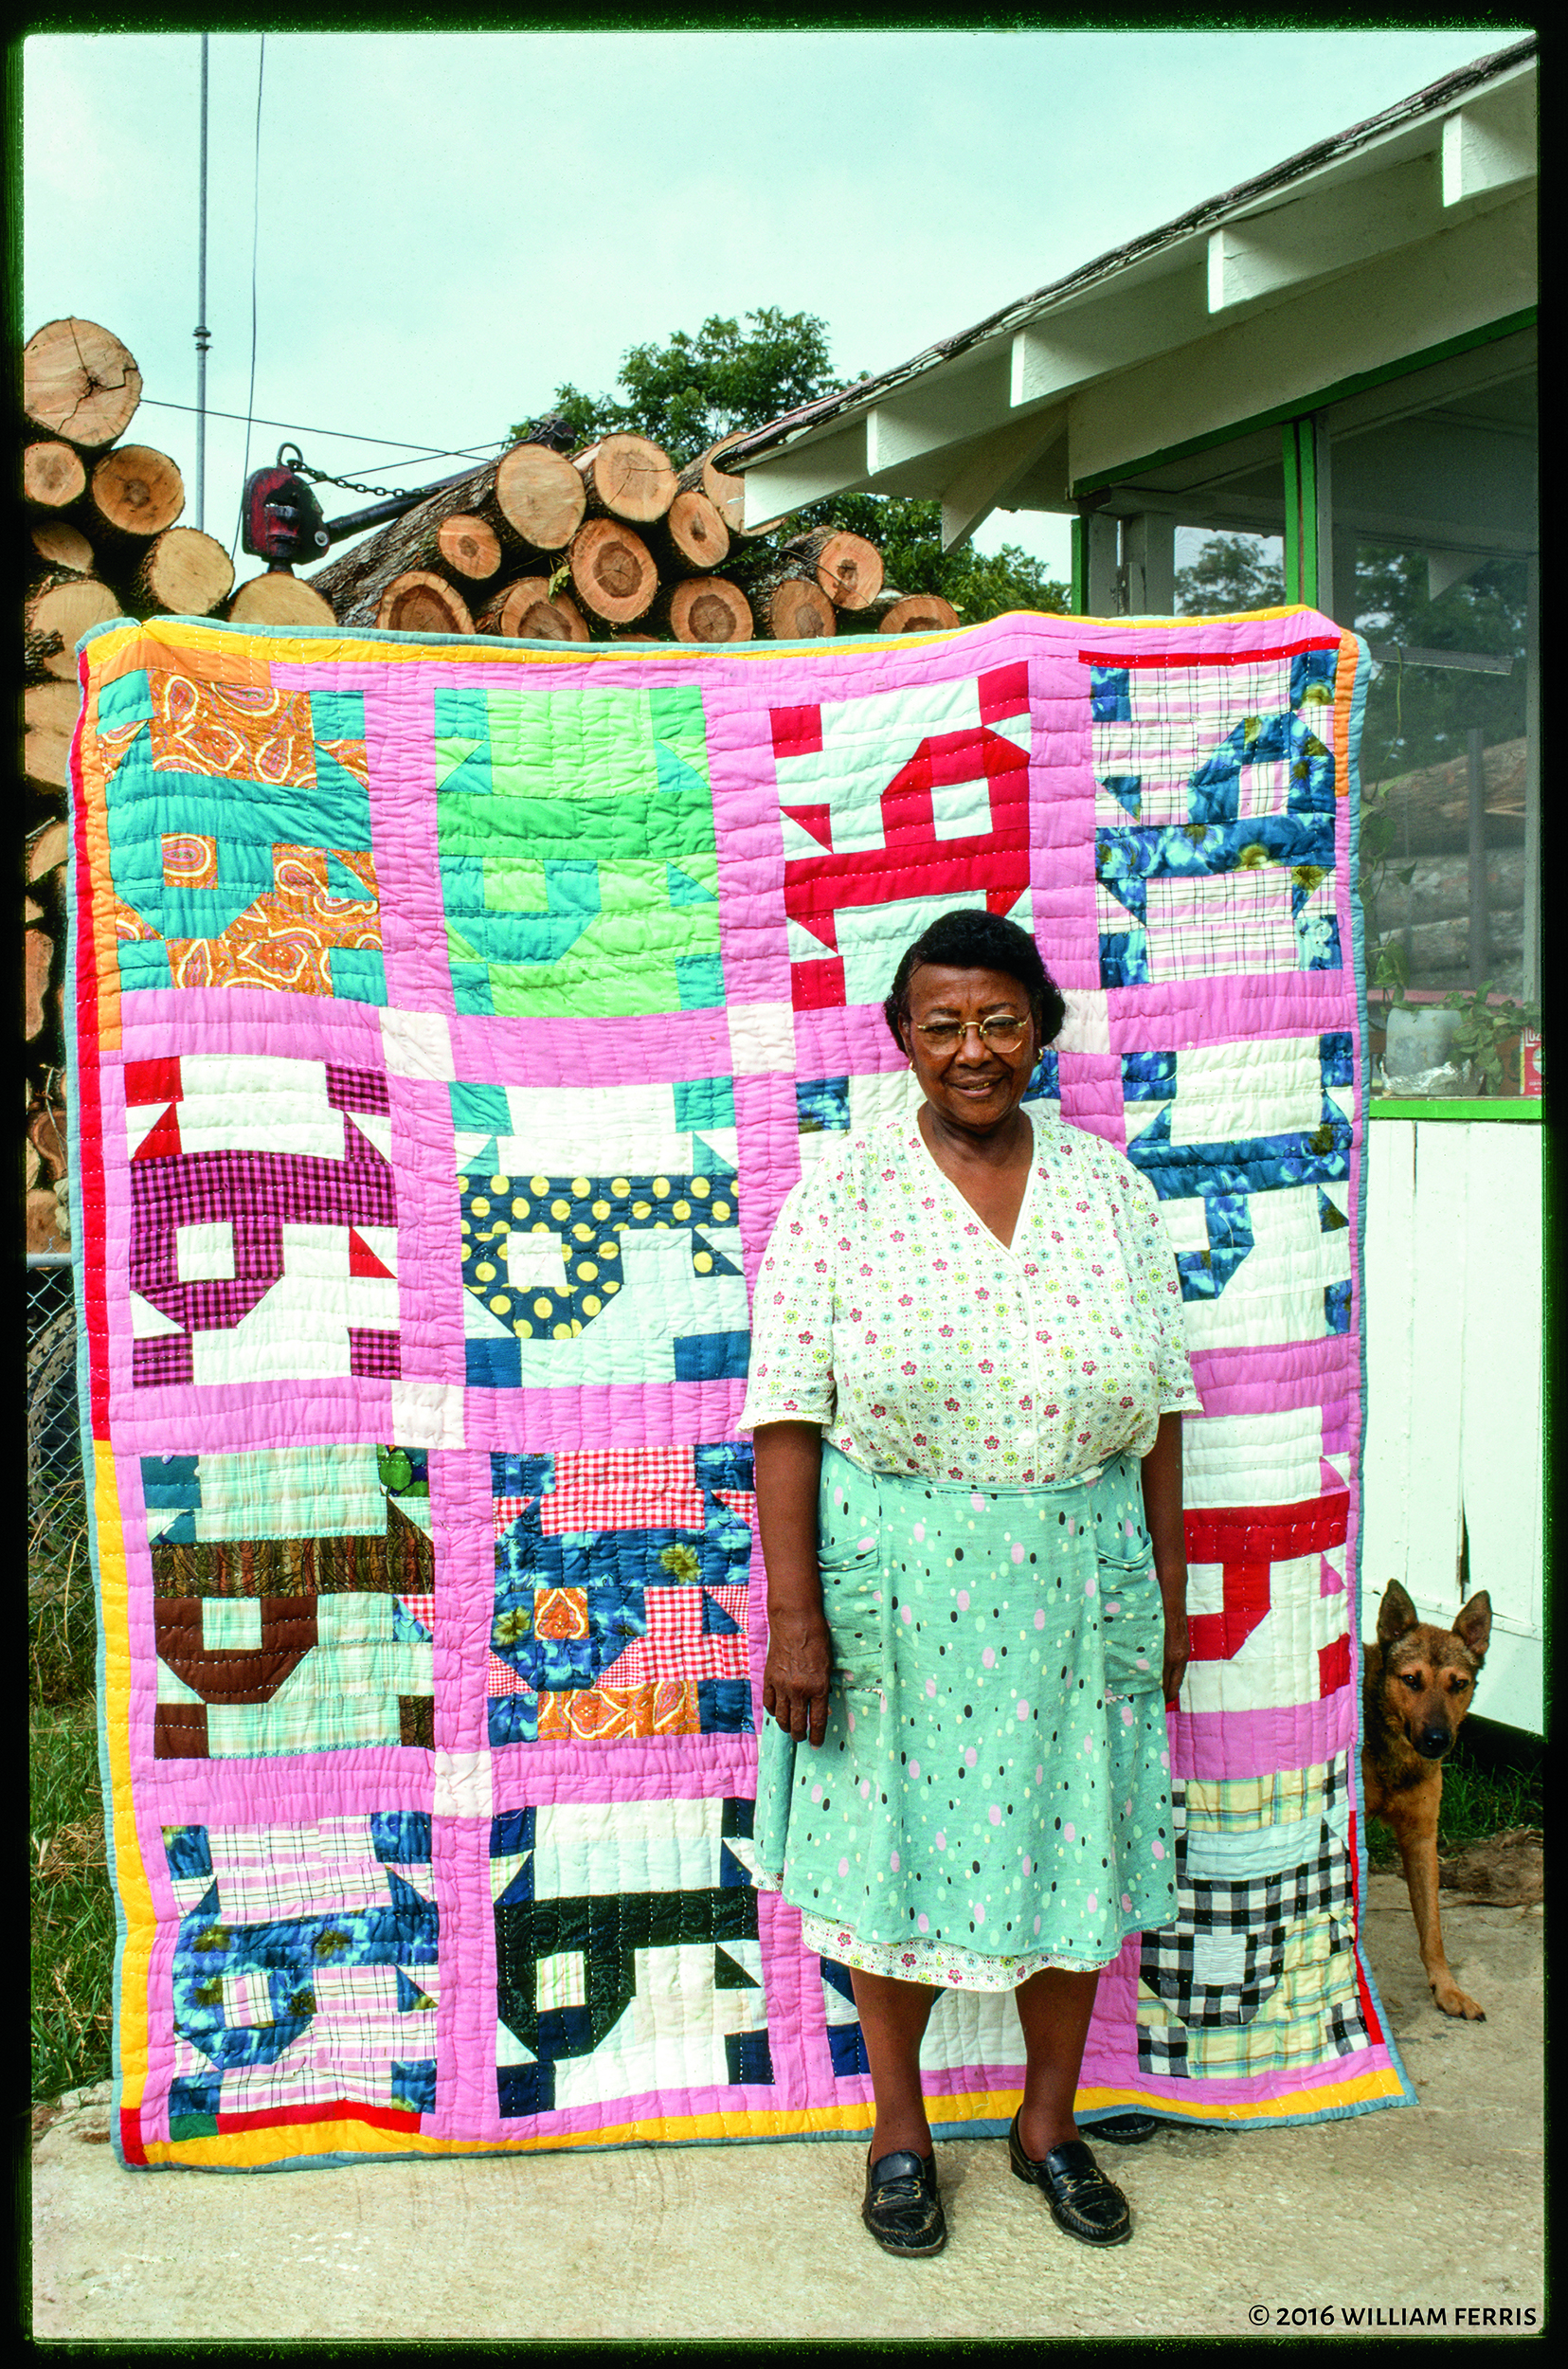 Pecolia Warner stands in front of a colorful quilt decorated with squares with 'P' in them